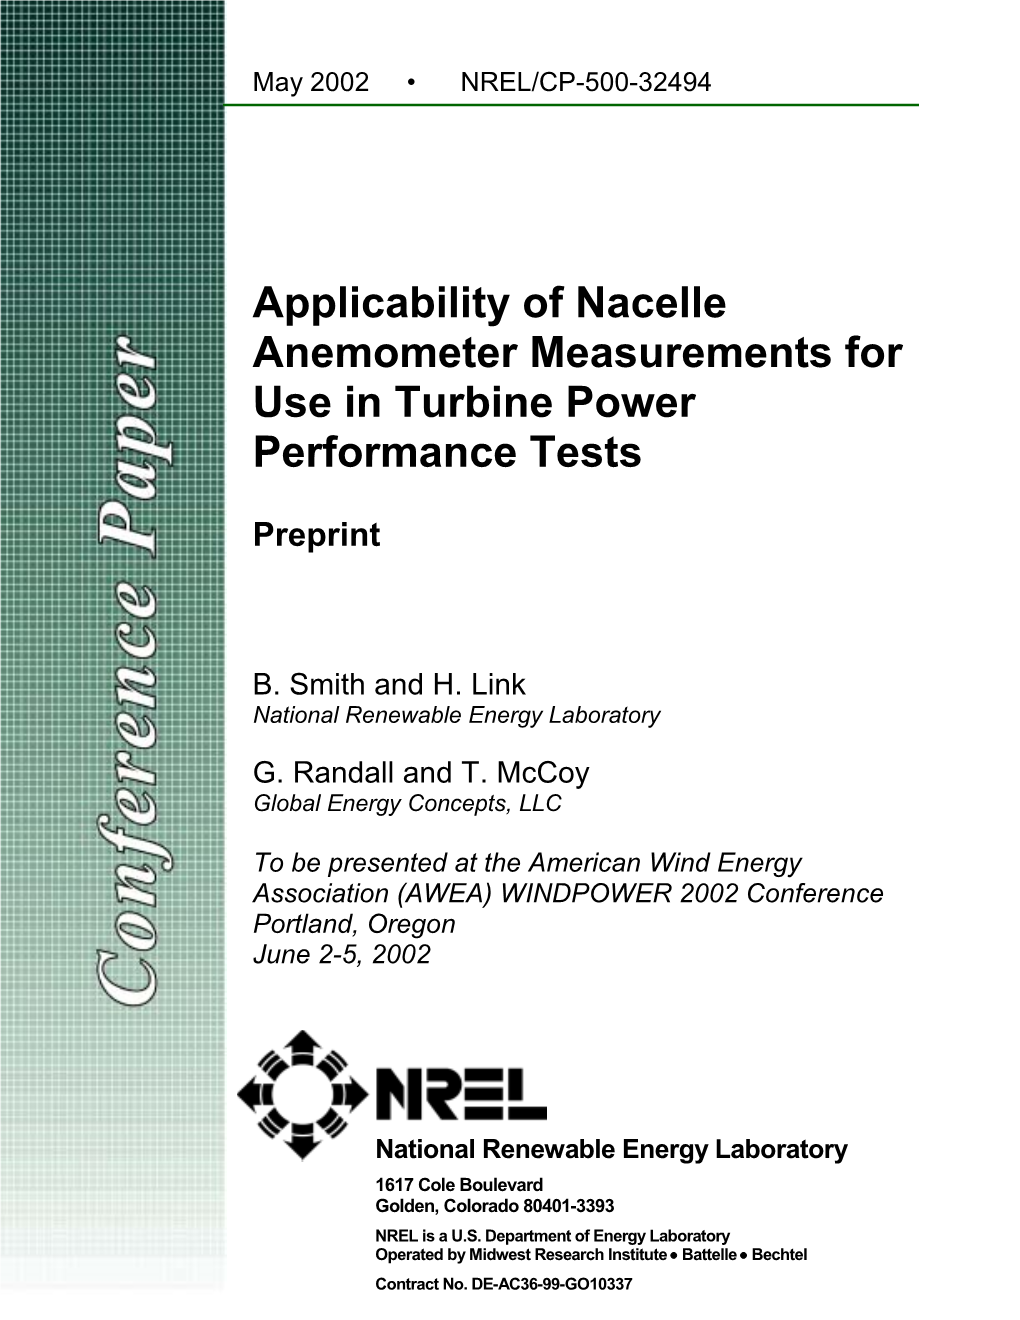 Applicability of Nacelle Anemometer Measurements for Use in Turbine Power Performance Tests